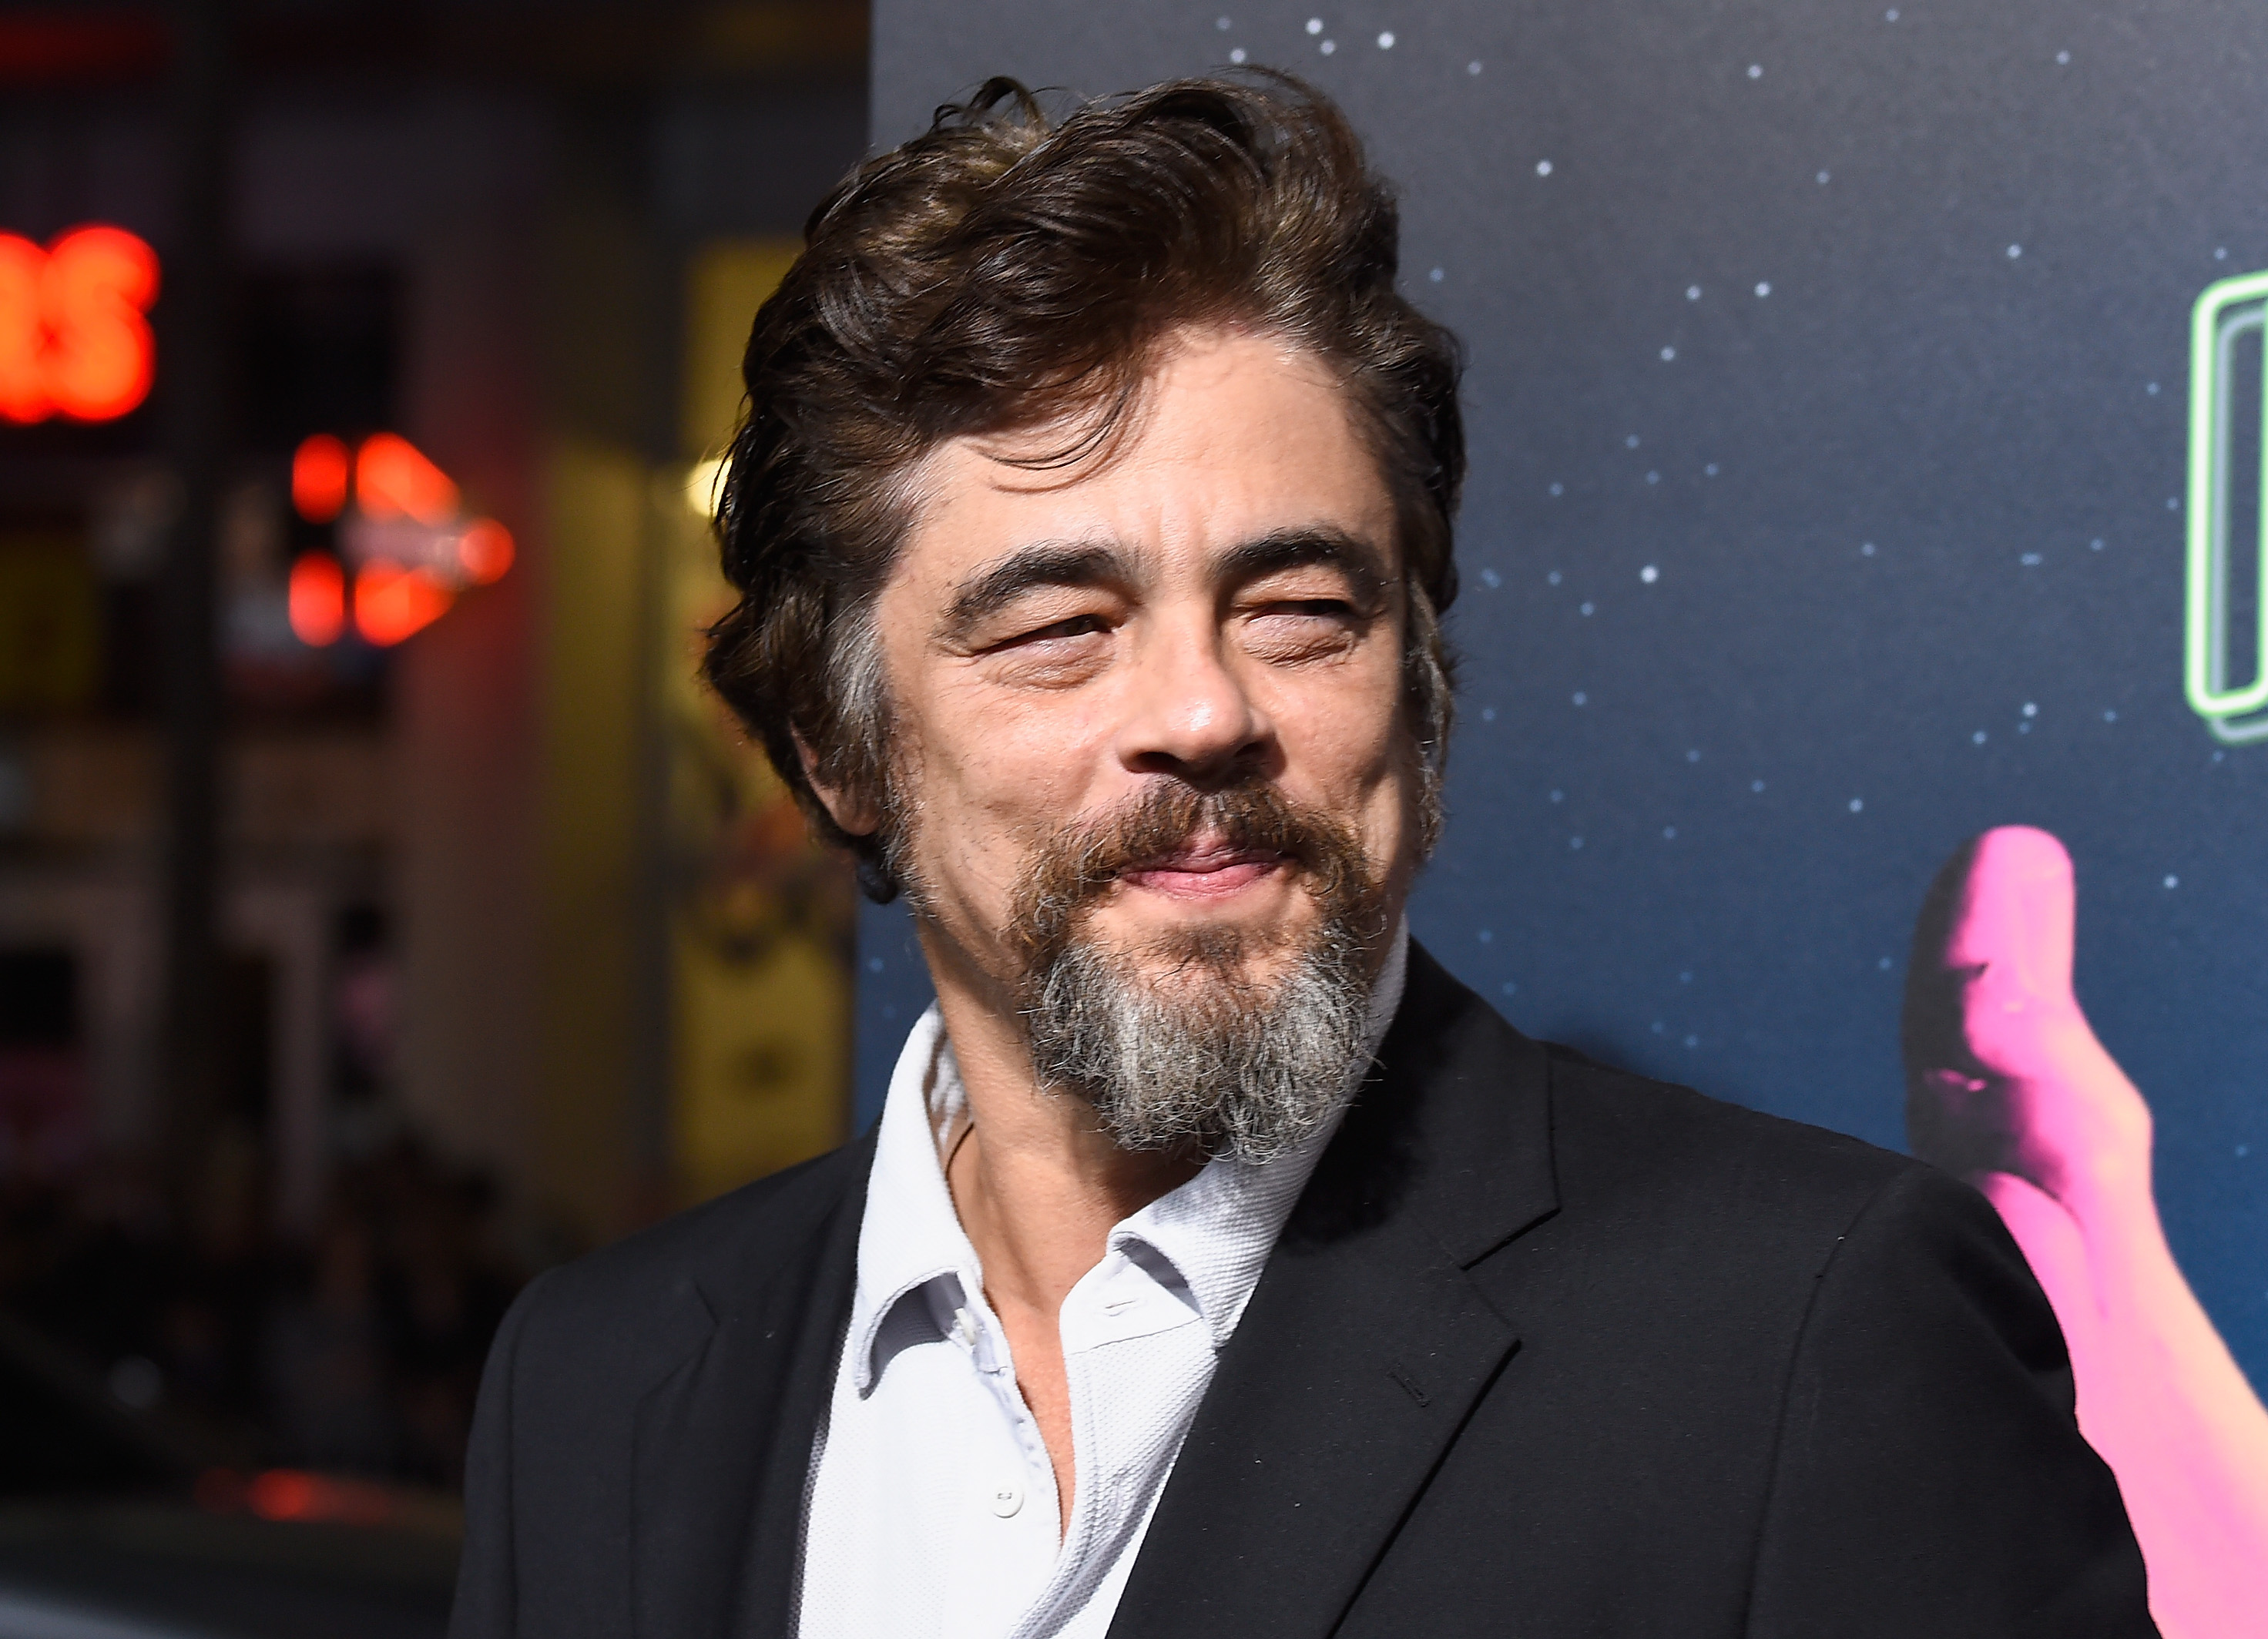 HOLLYWOOD, CA - DECEMBER 10:  Actor Benicio del Toro attends the premiere of Warner Bros. Pictures' "Inherent Vice" at TCL Chinese Theatre on December 10, 2014 in Hollywood, California.  (Photo by Frazer Harrison/Getty Images)